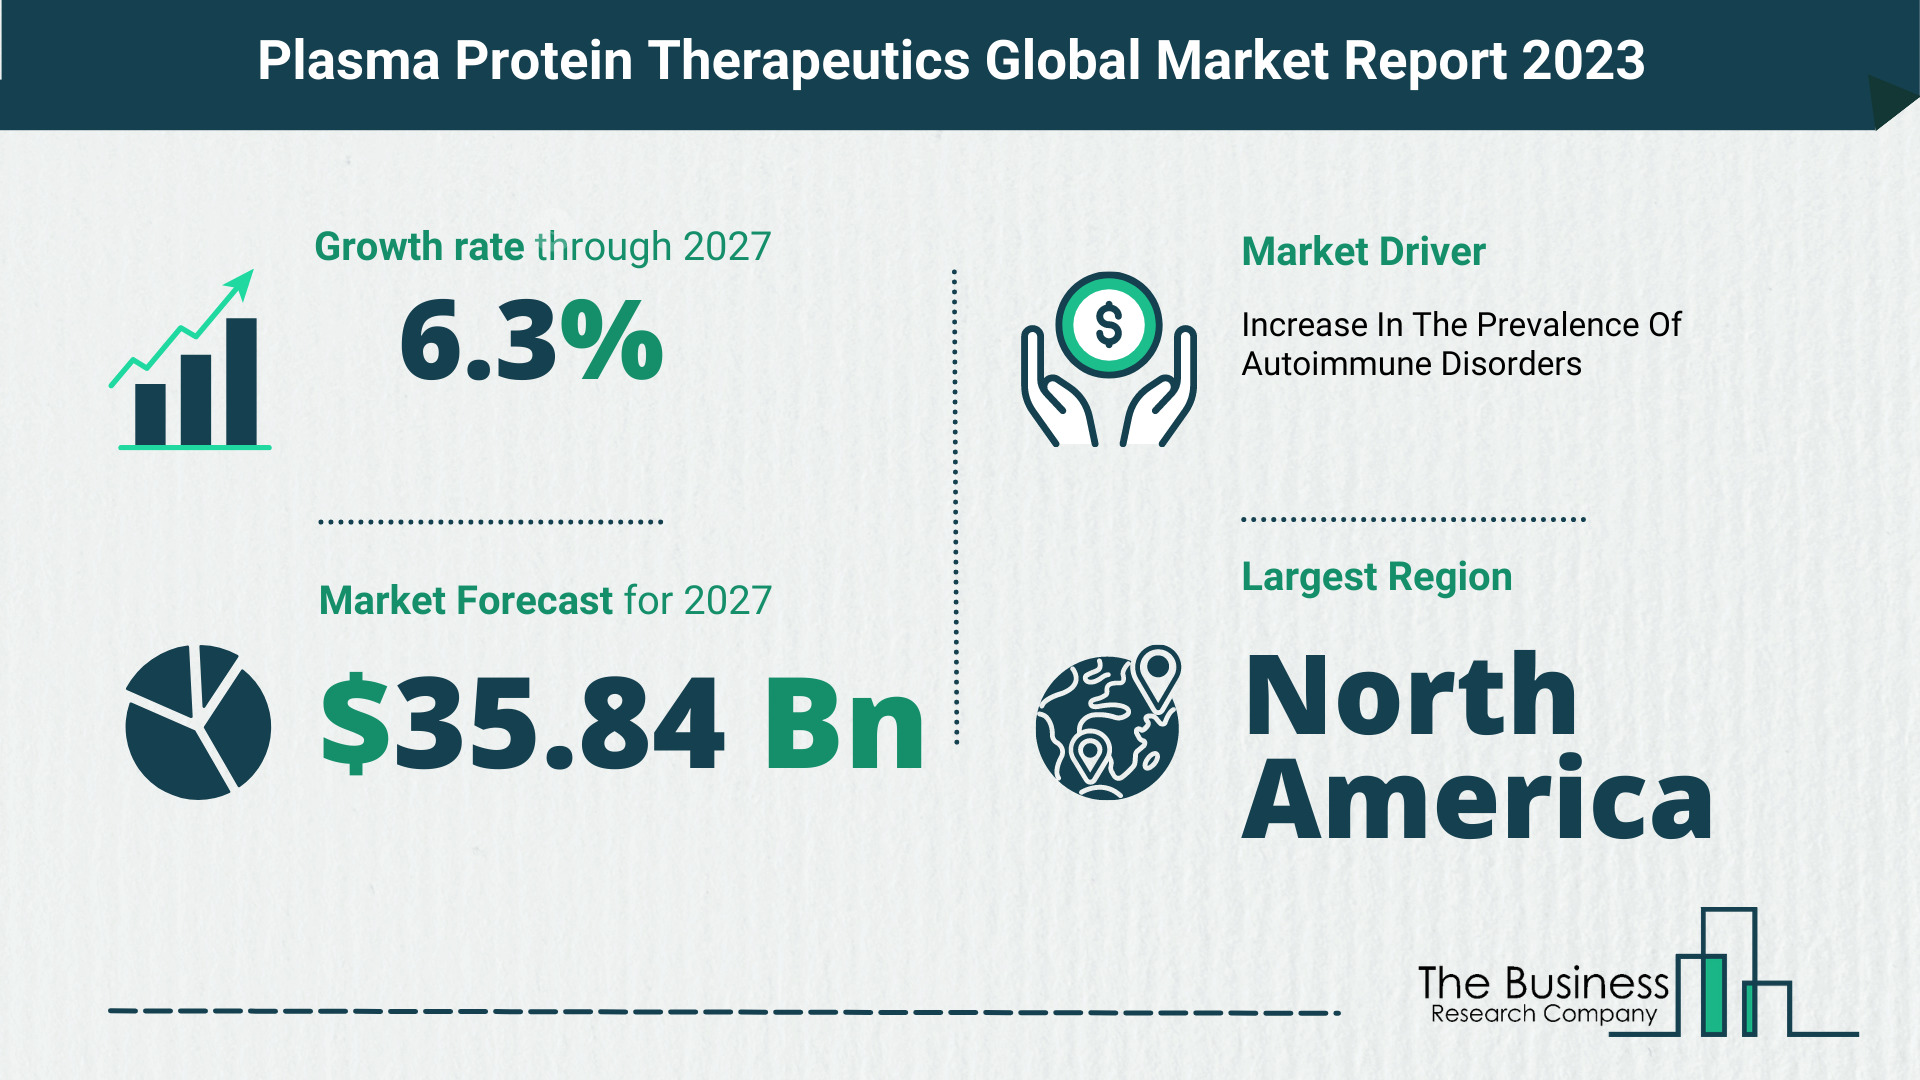 What Will The Plasma Protein Therapeutics Market Look Like In 2023?